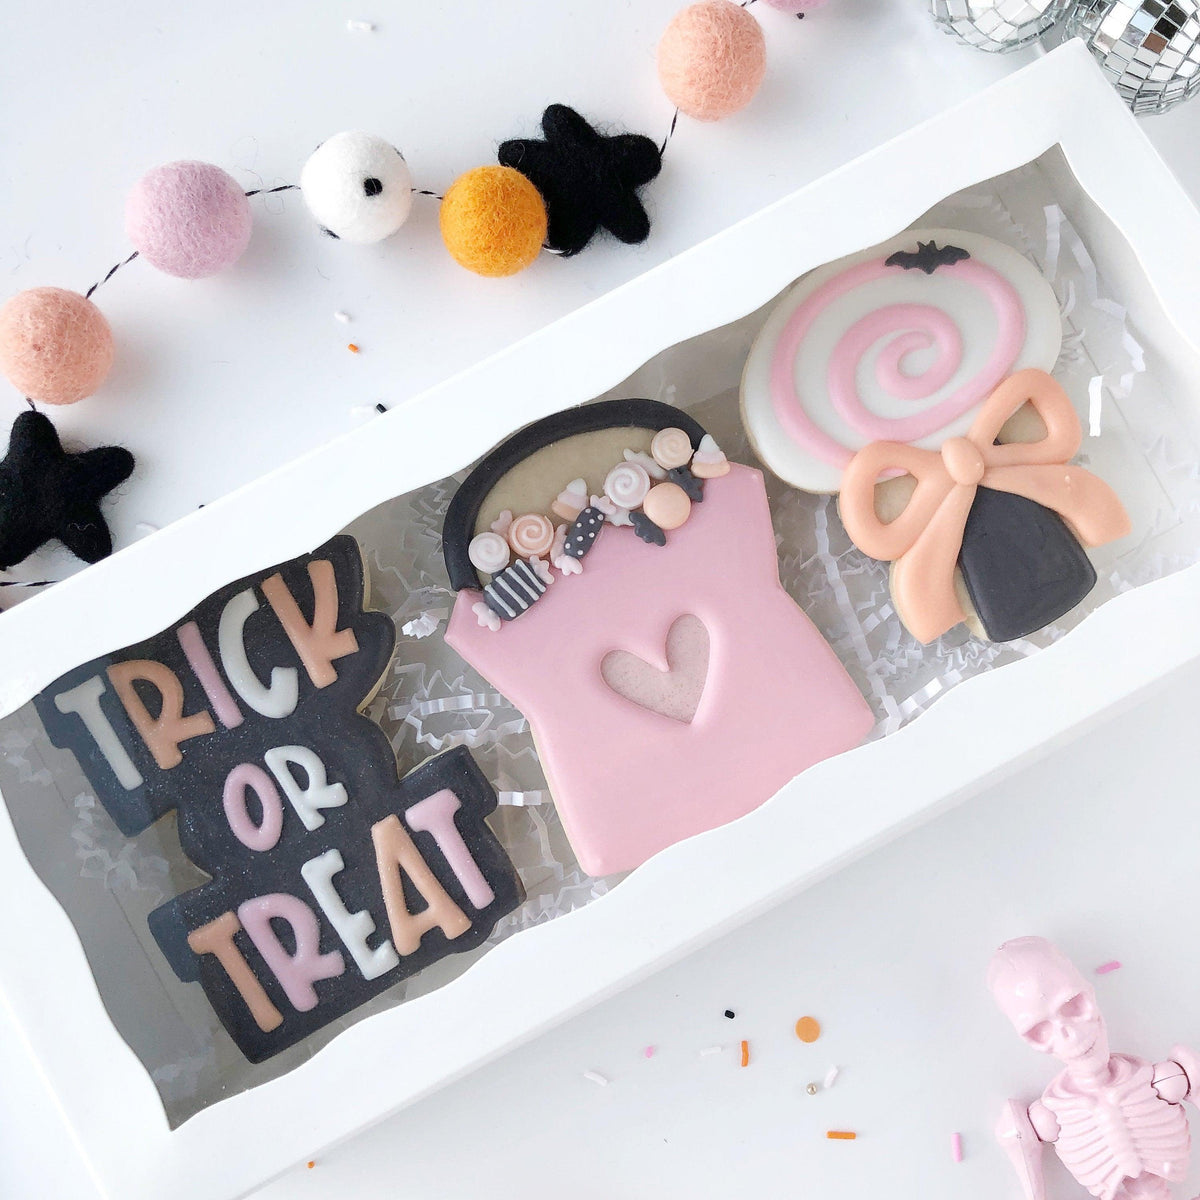 Chubby Trick or Treat Cookie Cutters - Sweetleigh 